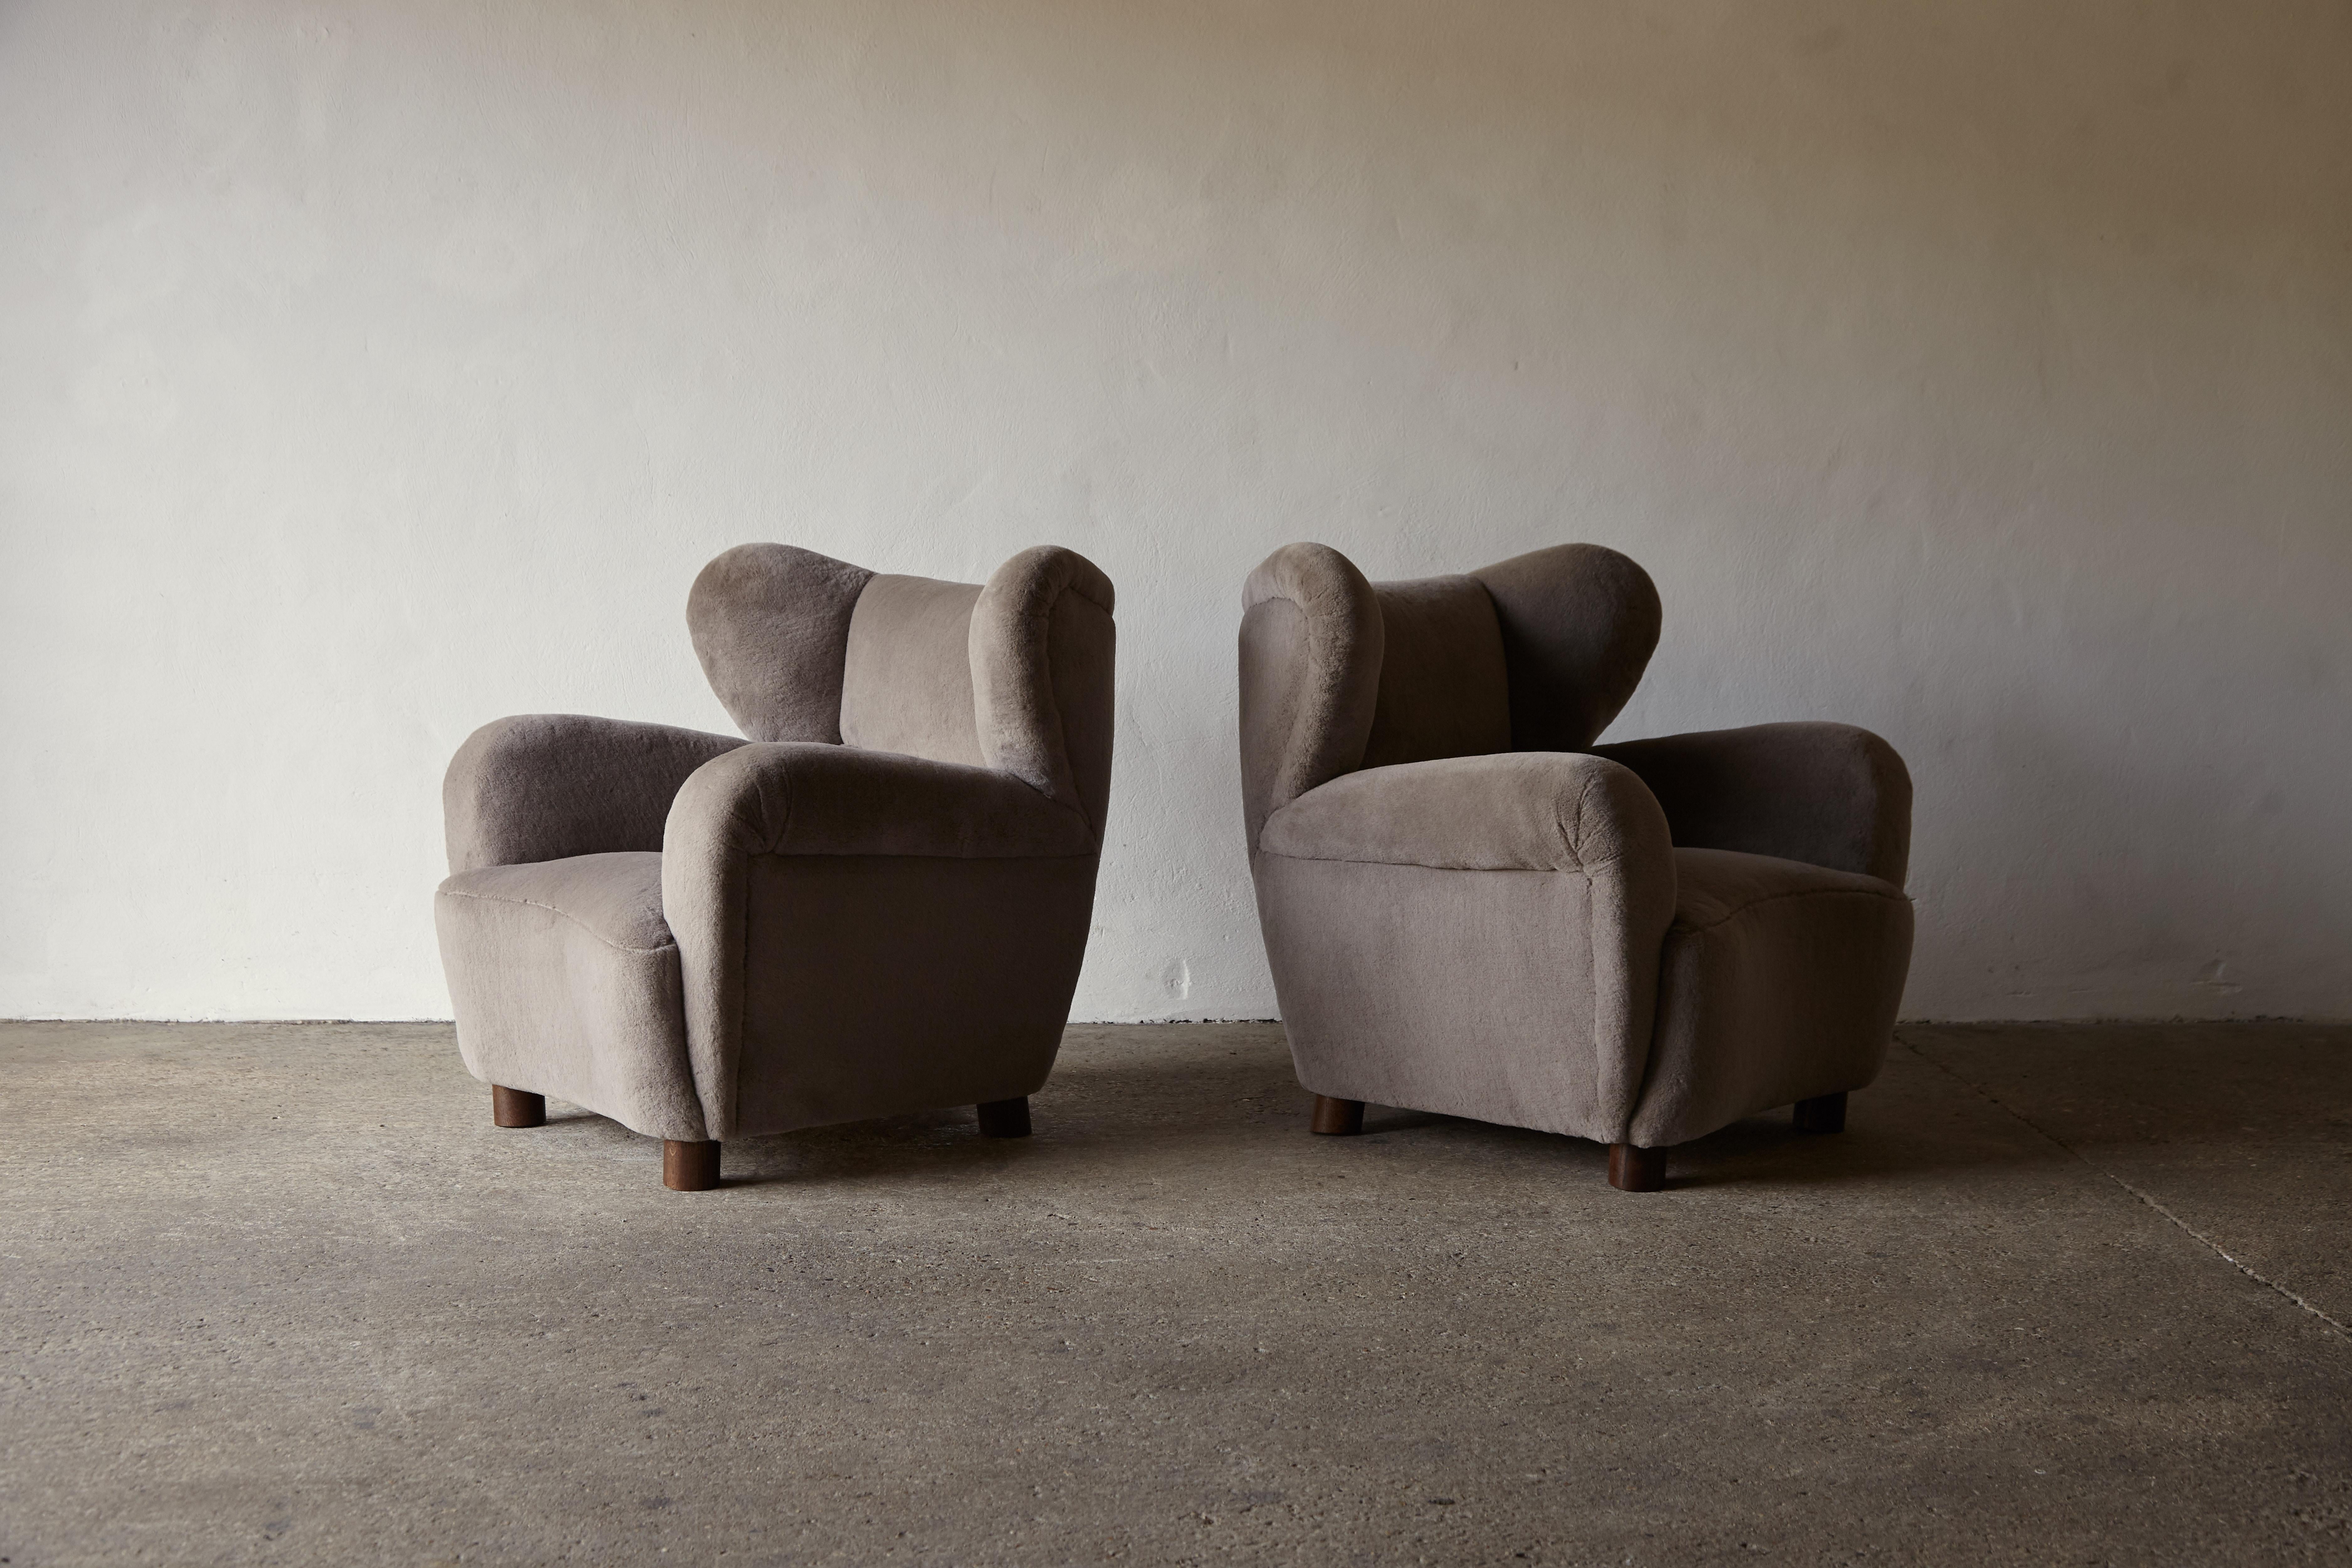 20th Century Superb Pair of Armchairs, Newly Upholstered in Pure Alpaca, Denmark, 1940s / 50s